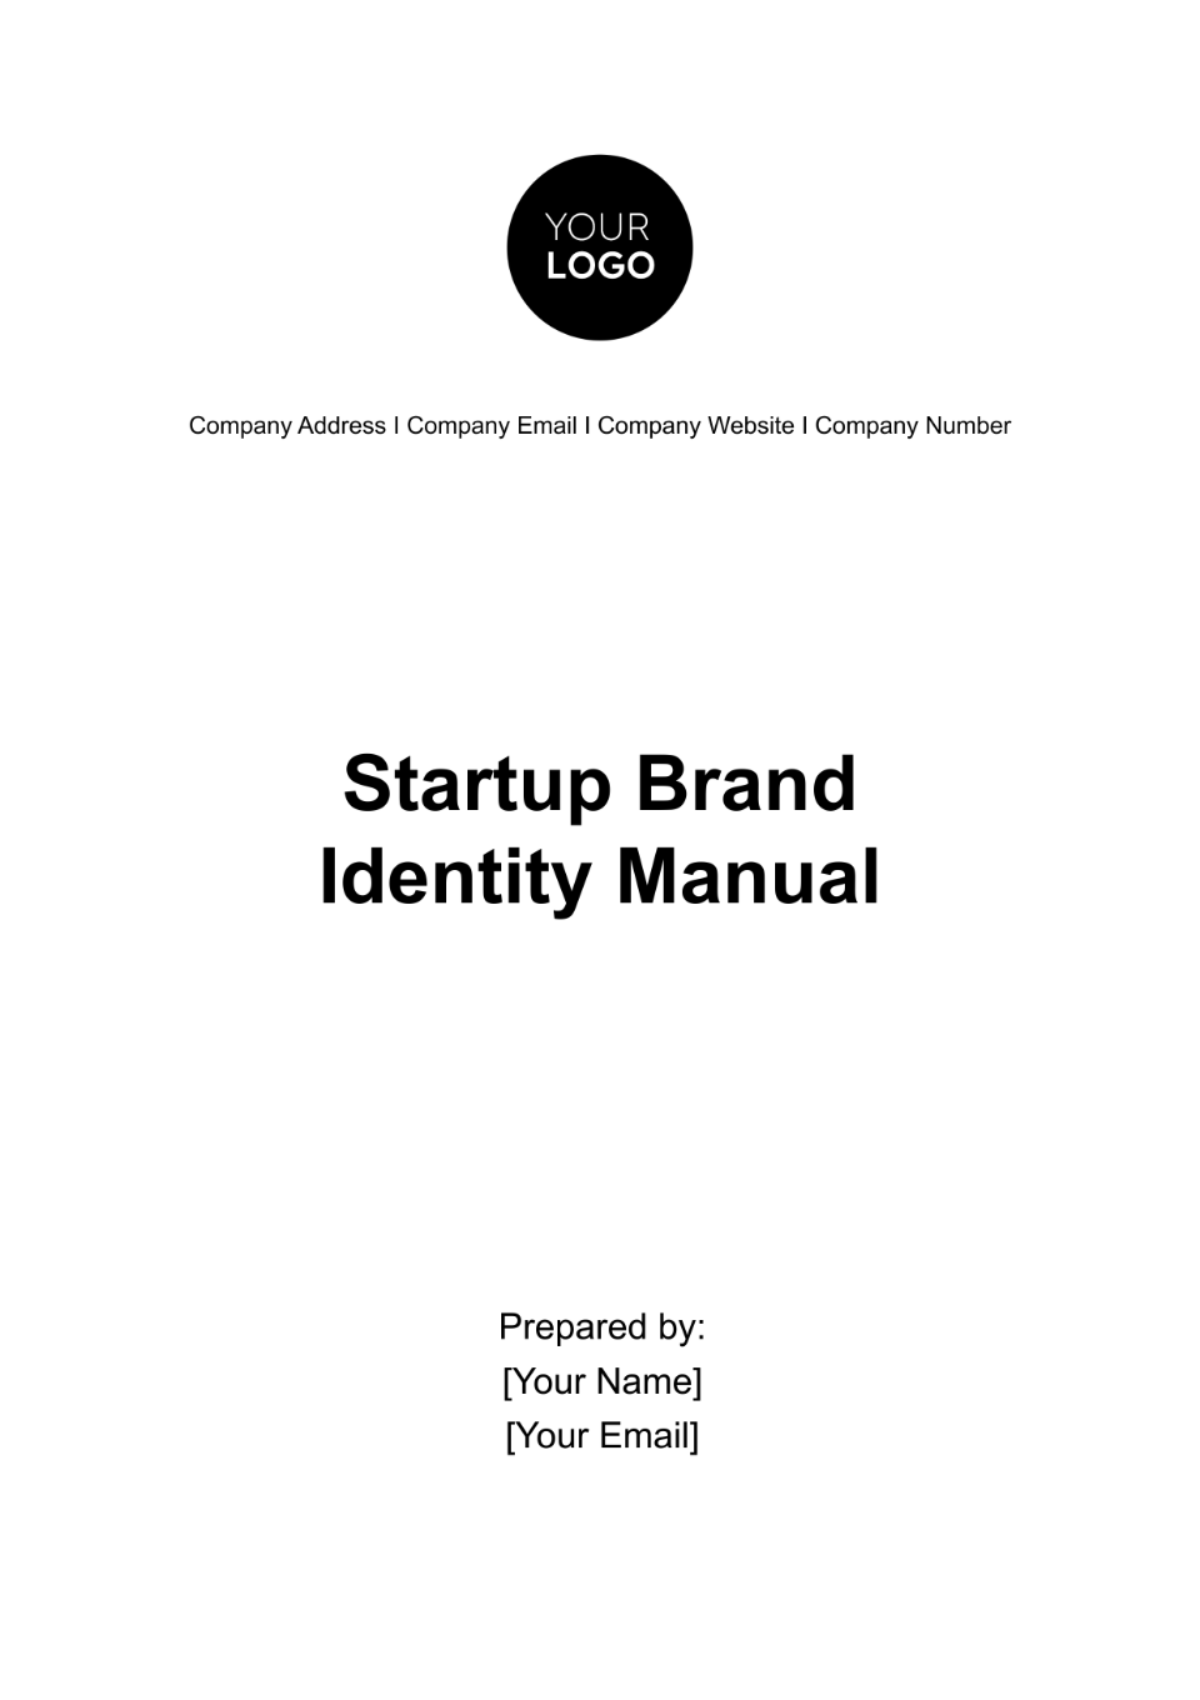 Startup Brand Identity Manual Template